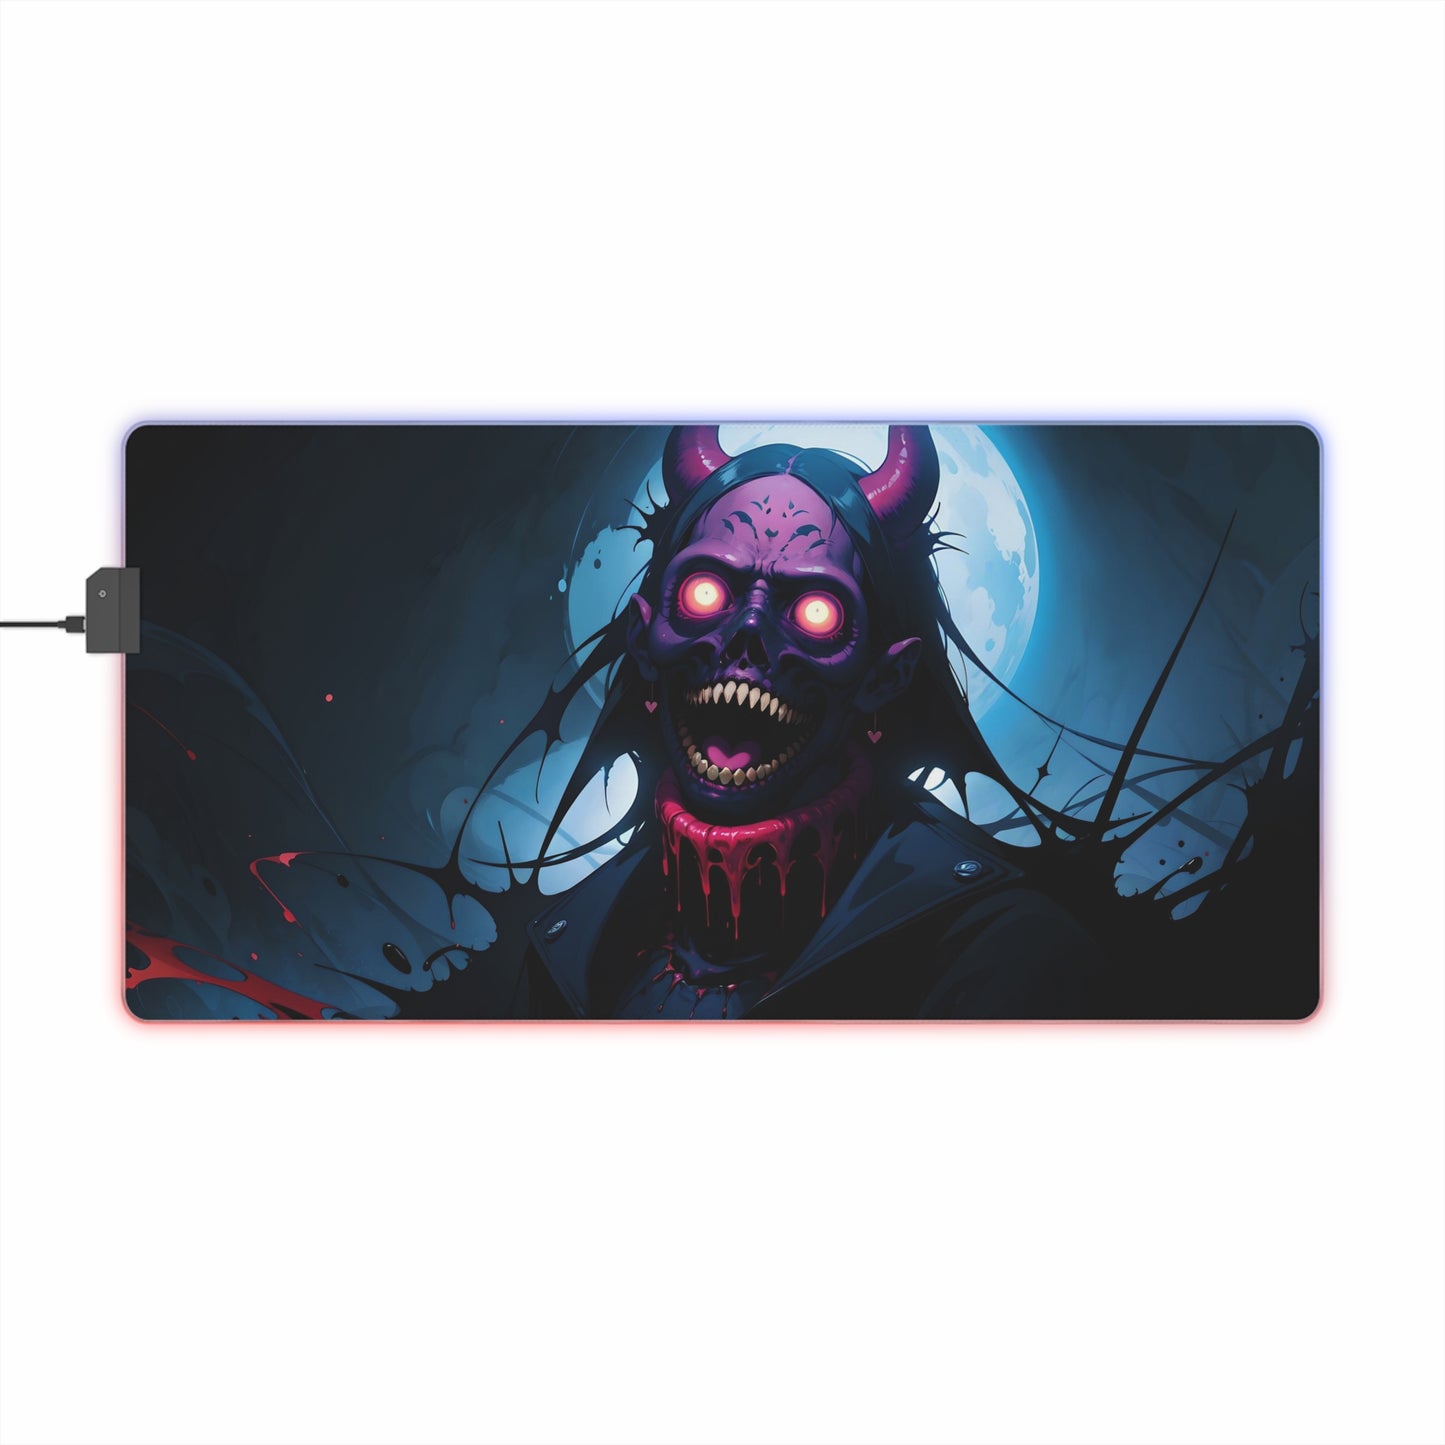 LCAM-26 LED Gaming Mouse Pad